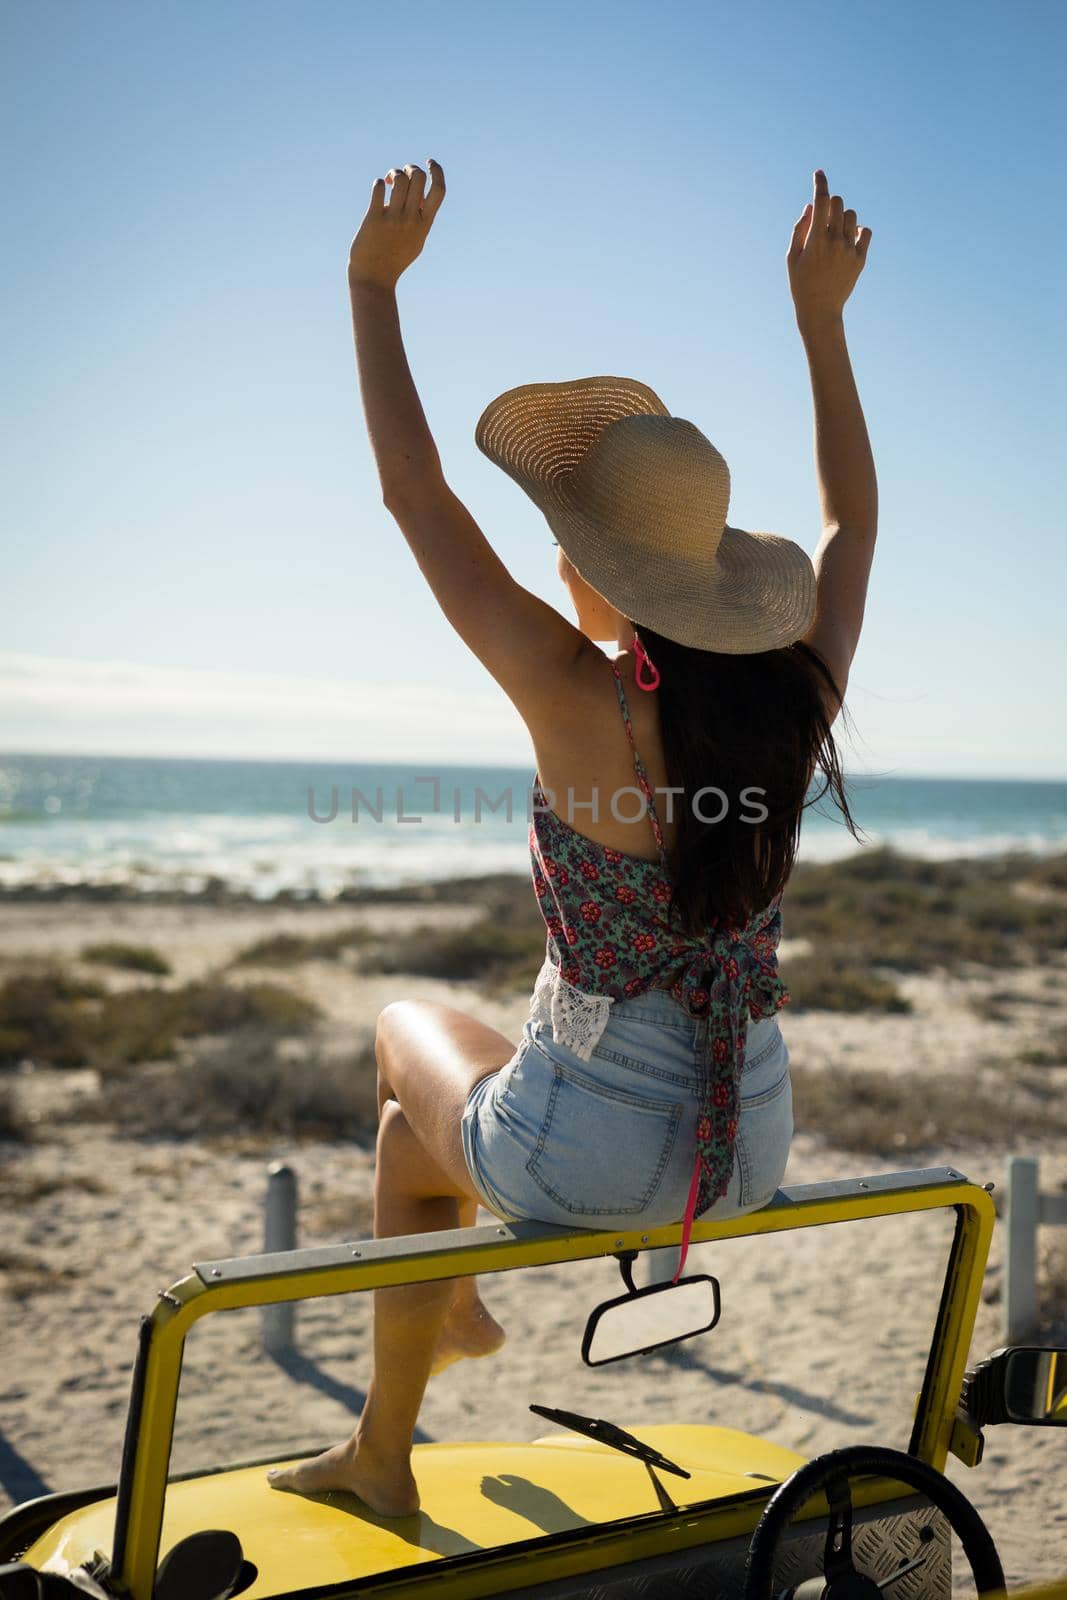 Caucasian woman sitting on beach buggy by the sea wearing straw hat looking toward sea with hands up by Wavebreakmedia